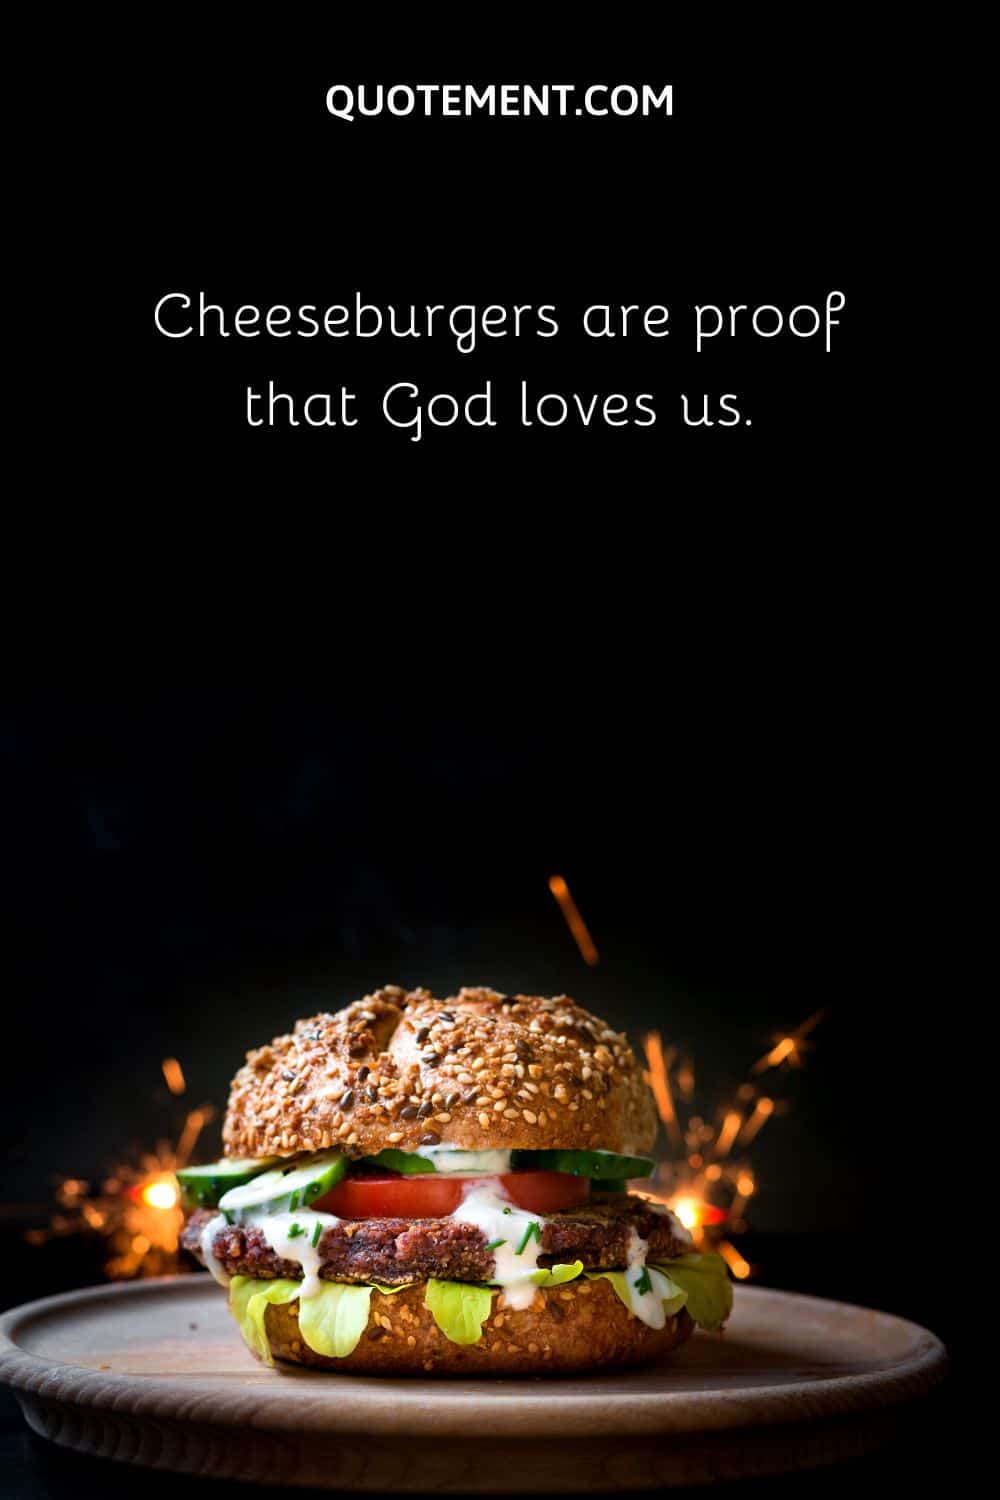 Cheeseburgers are proof that God loves us.